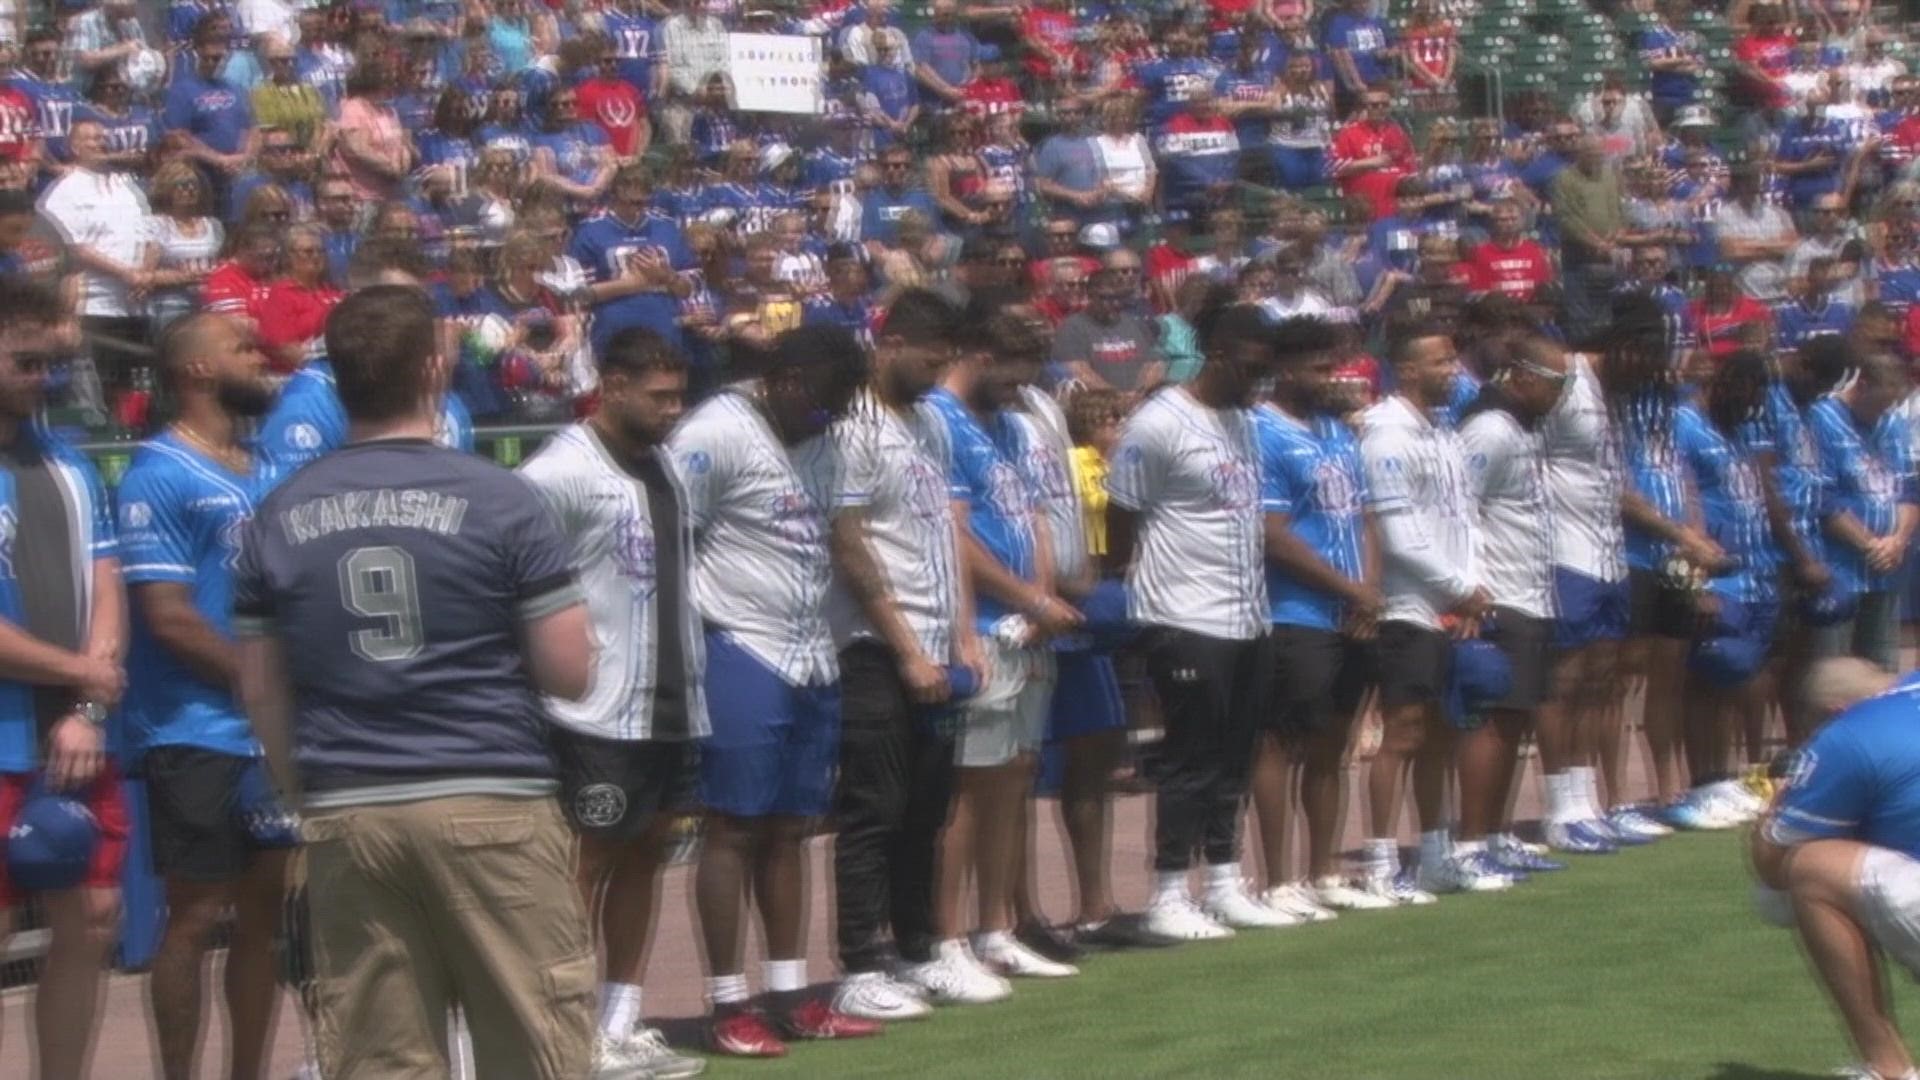 Day after Buffalo mass shooting, Bills find a way to help